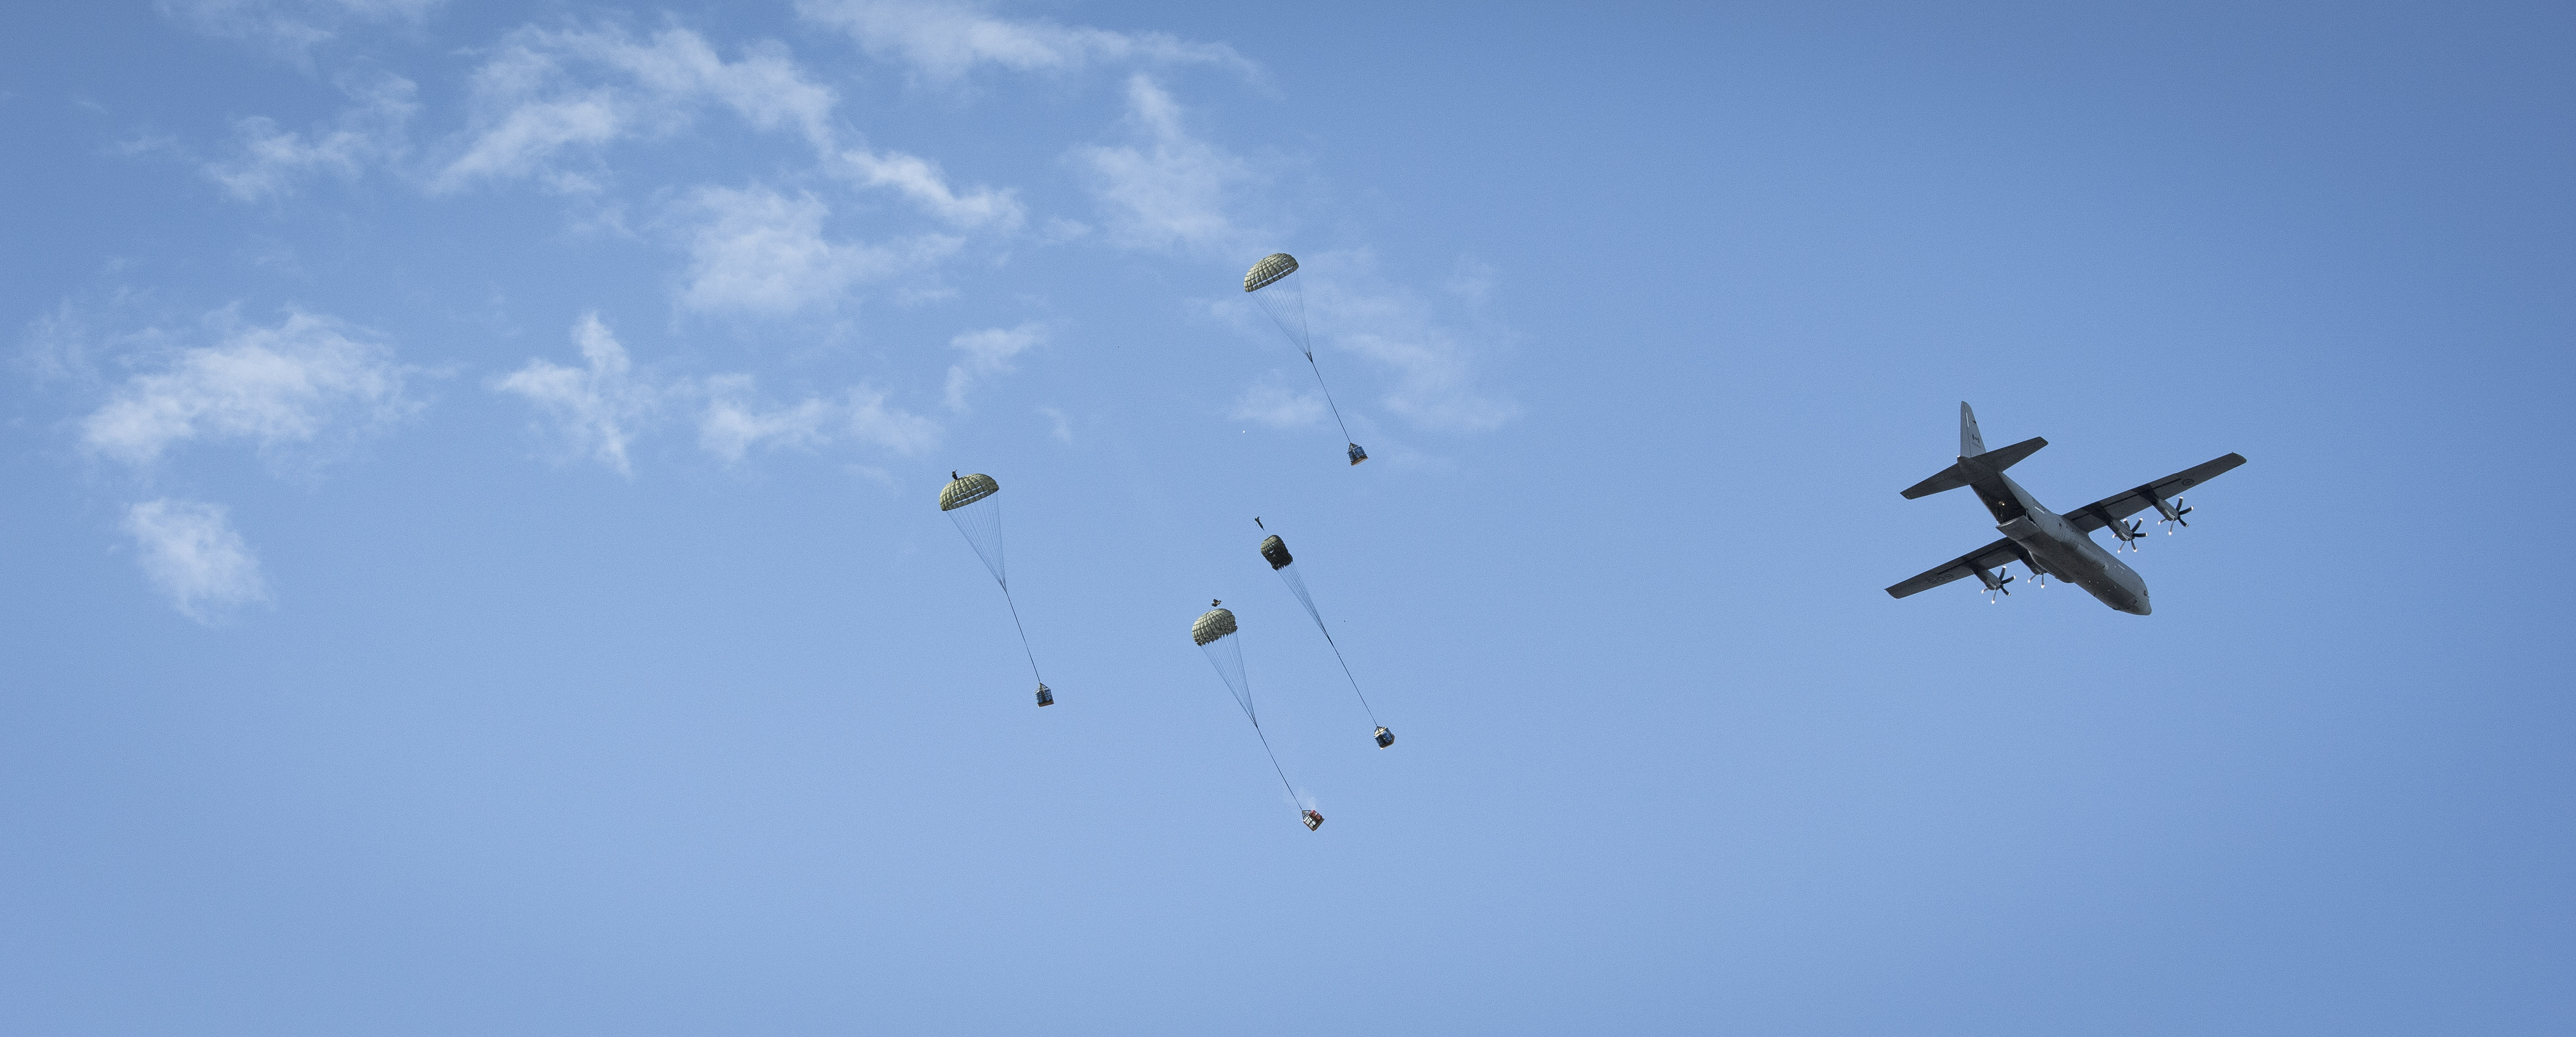 Four containers attached to parachutes falling in the sky with a large grey propeller aircraft flying overhead on the right.